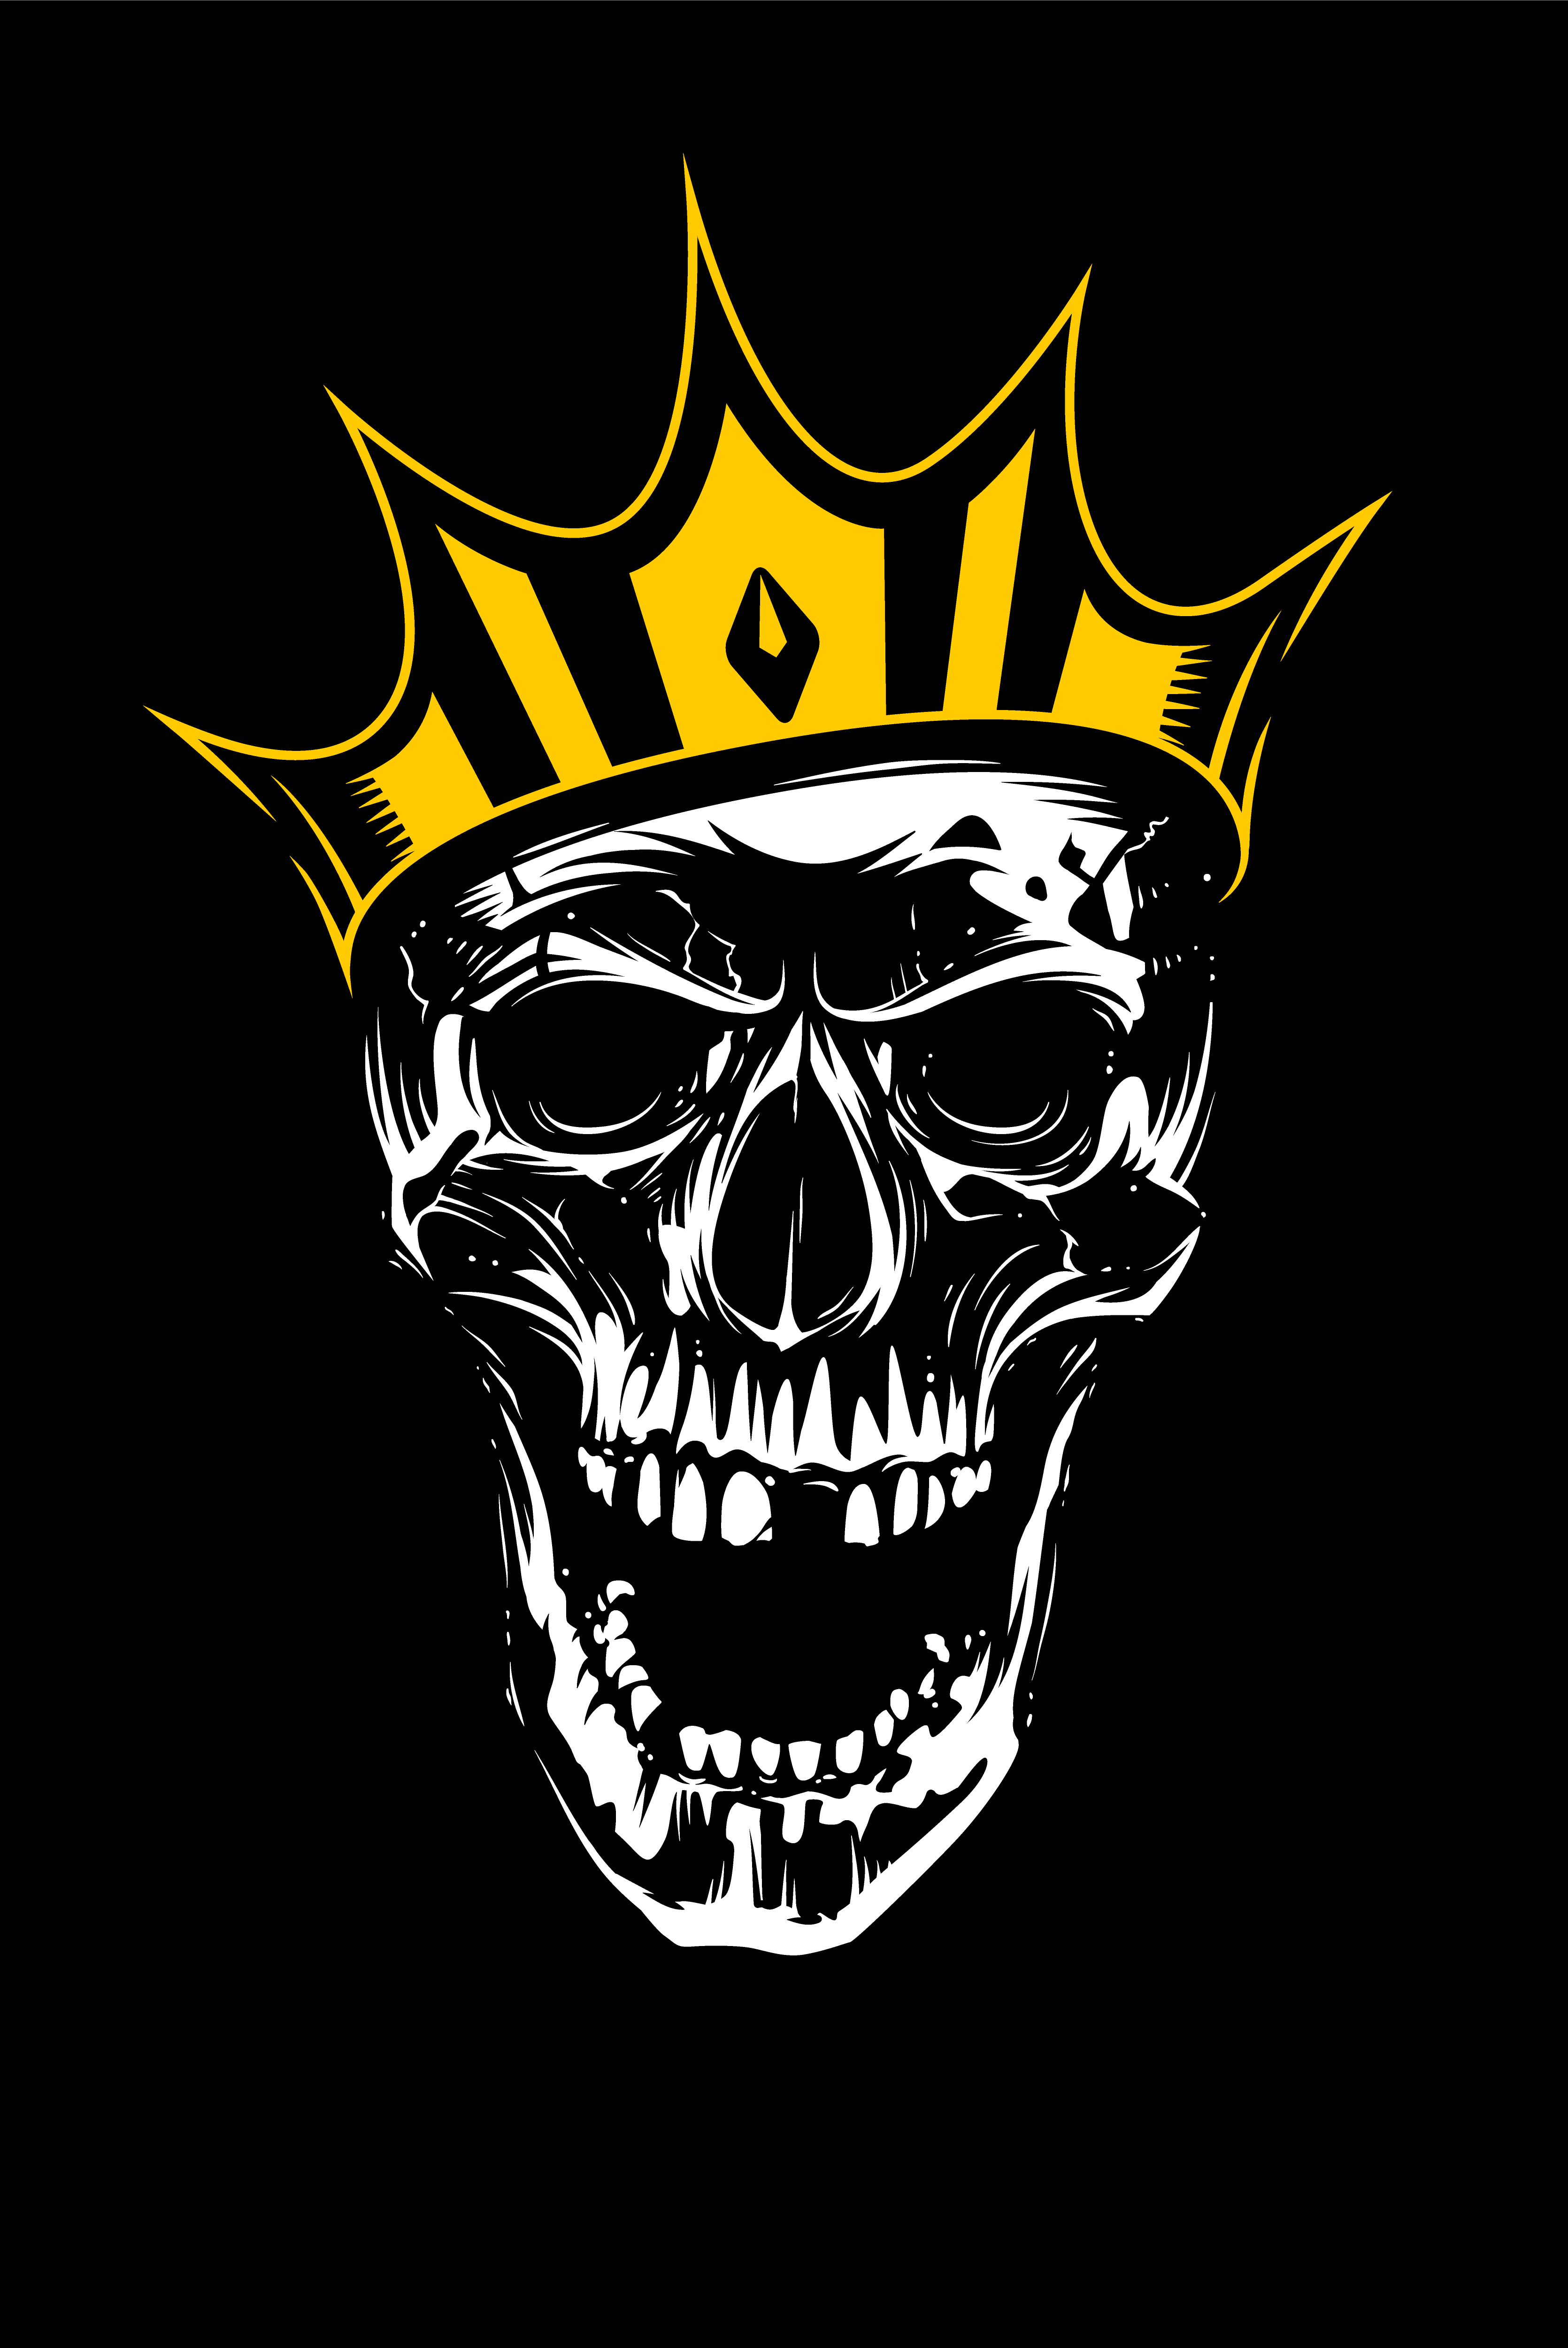 Download White Skull in Gold Crown on Black Background 376840 ...